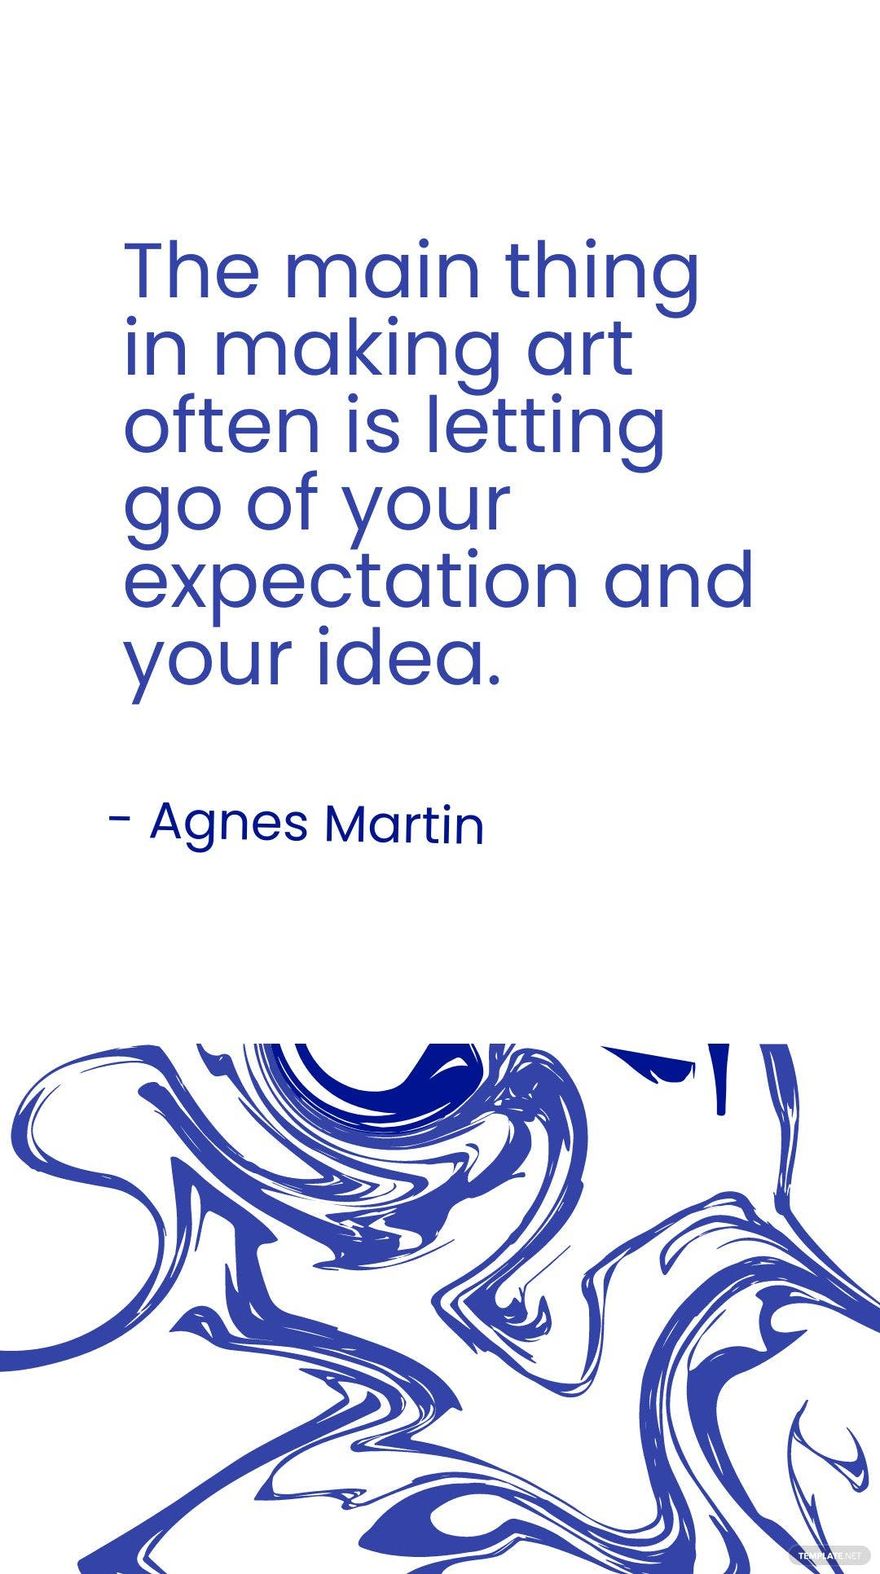 Agnes Martin - The main thing in making art often is letting go of your expectation and your idea. in JPG